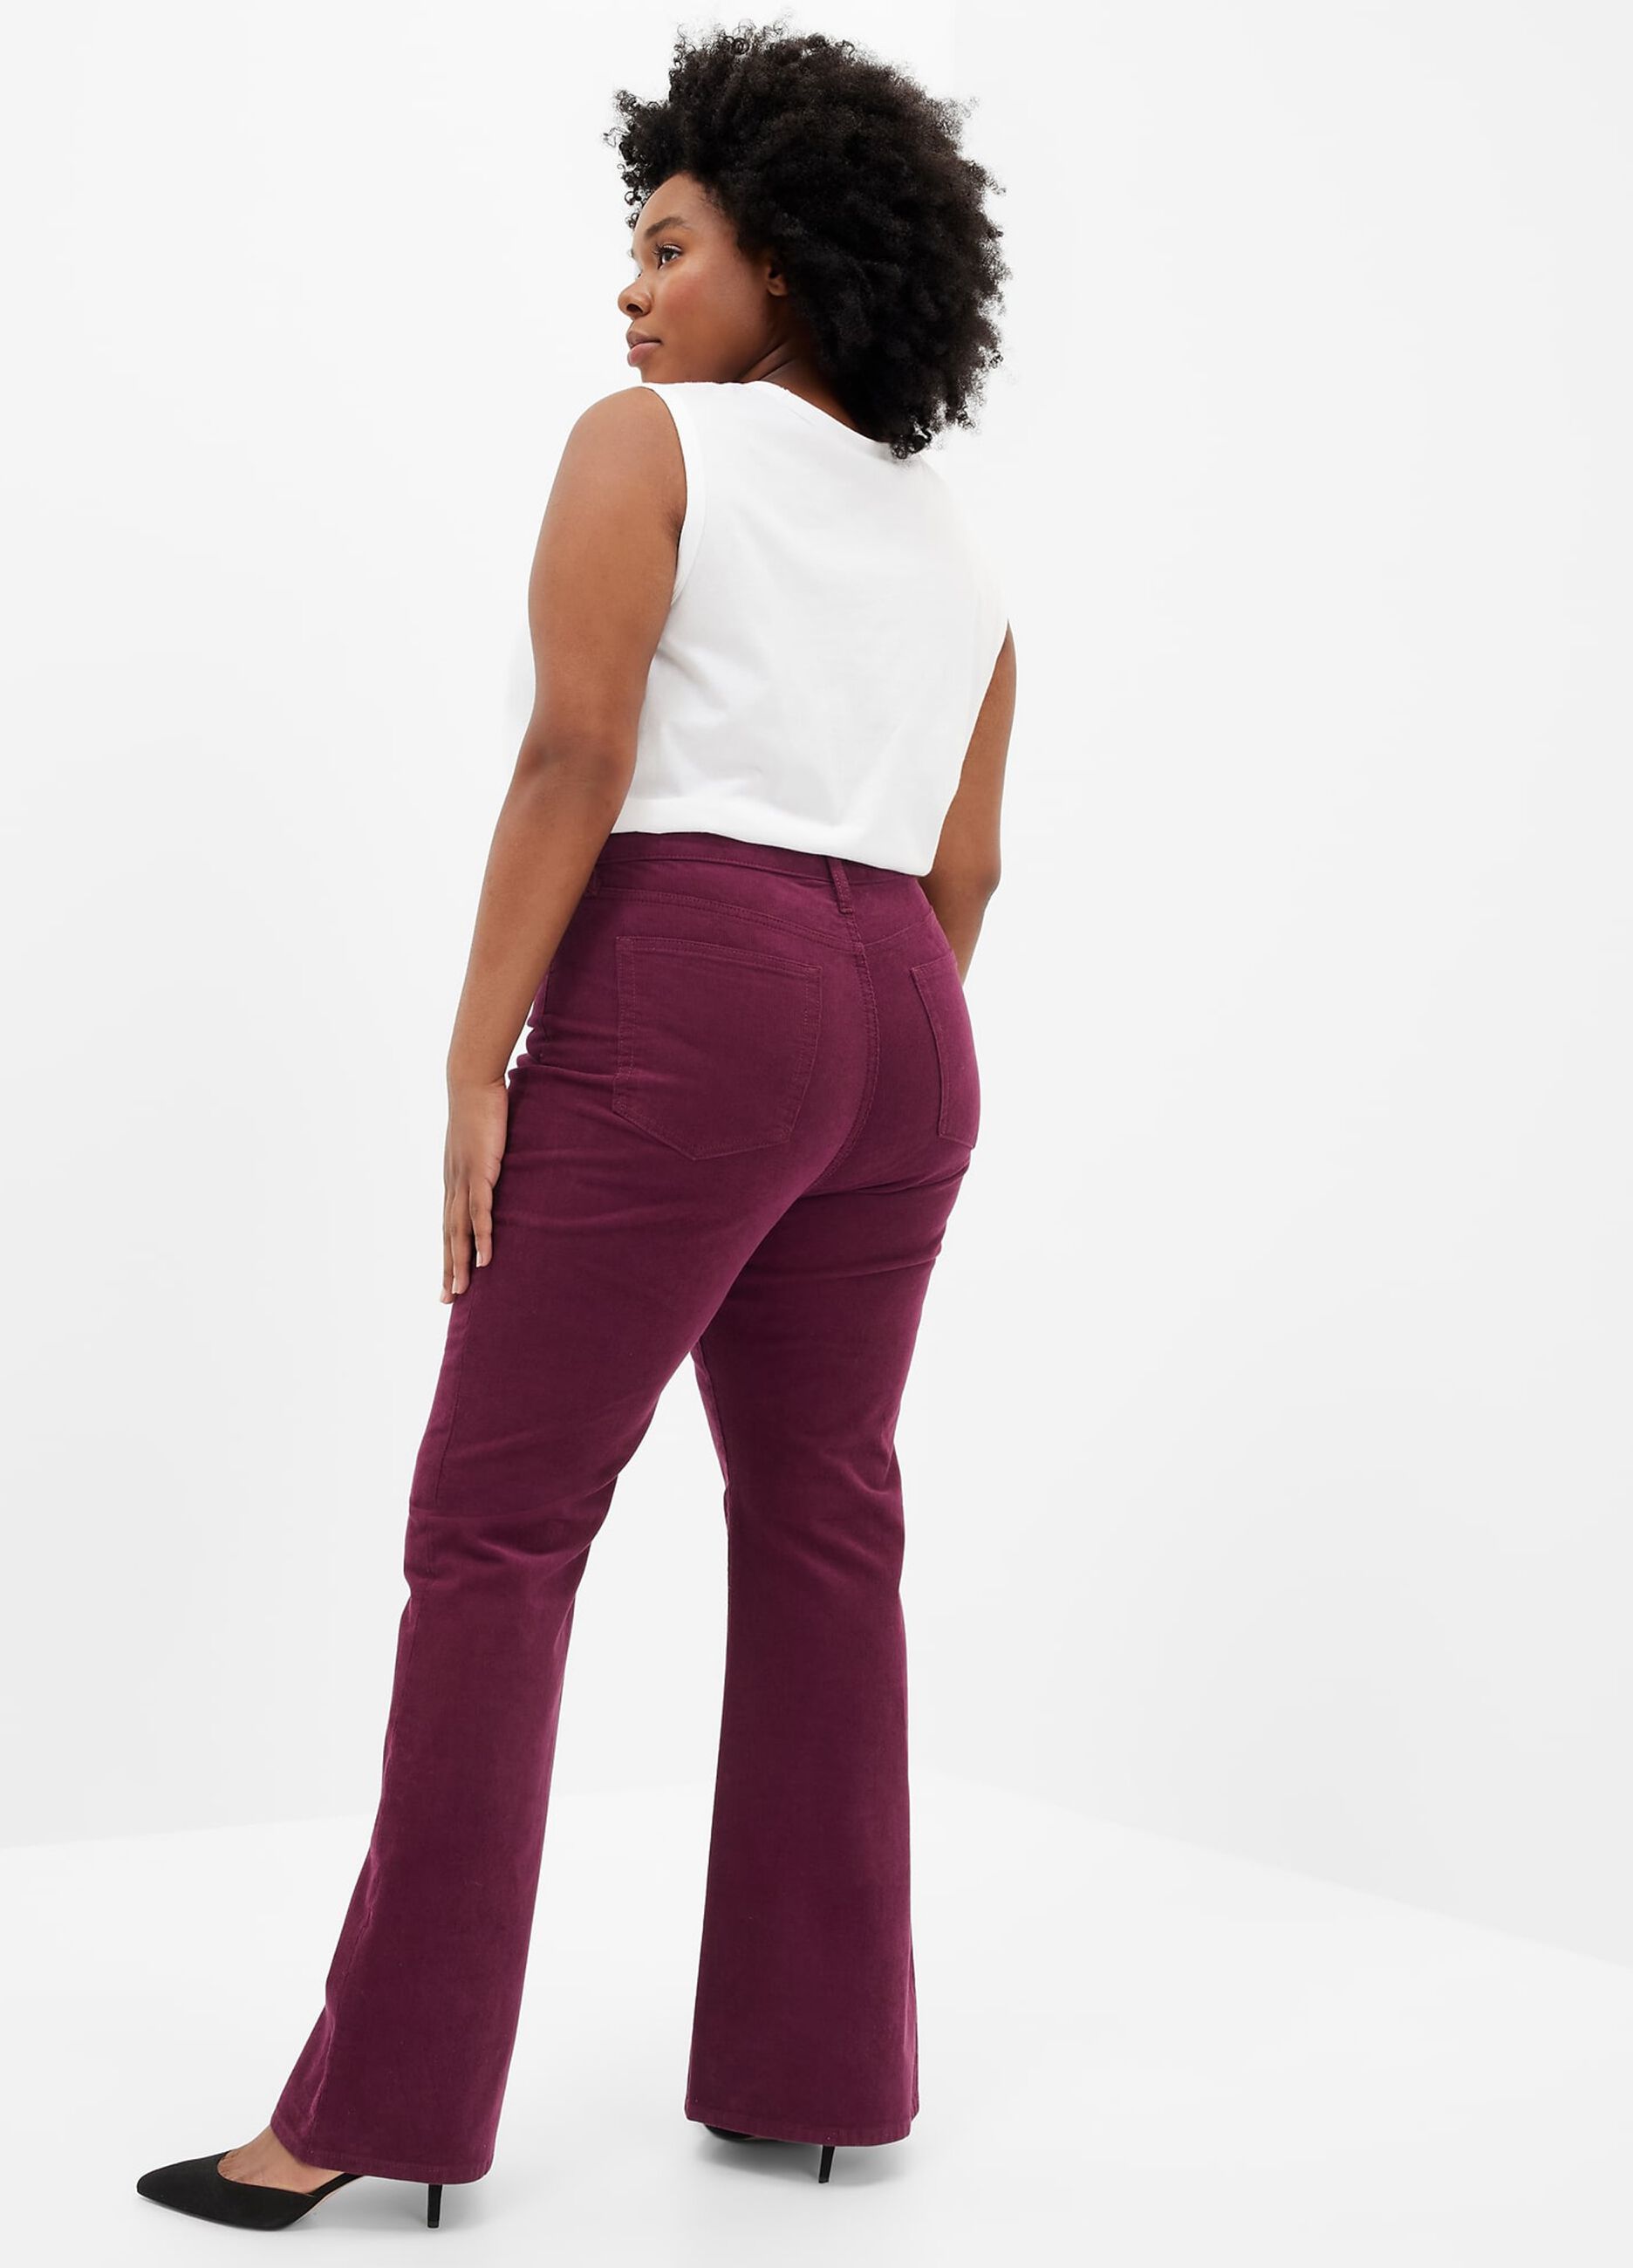 Jeans flare fit in corduroy stretch